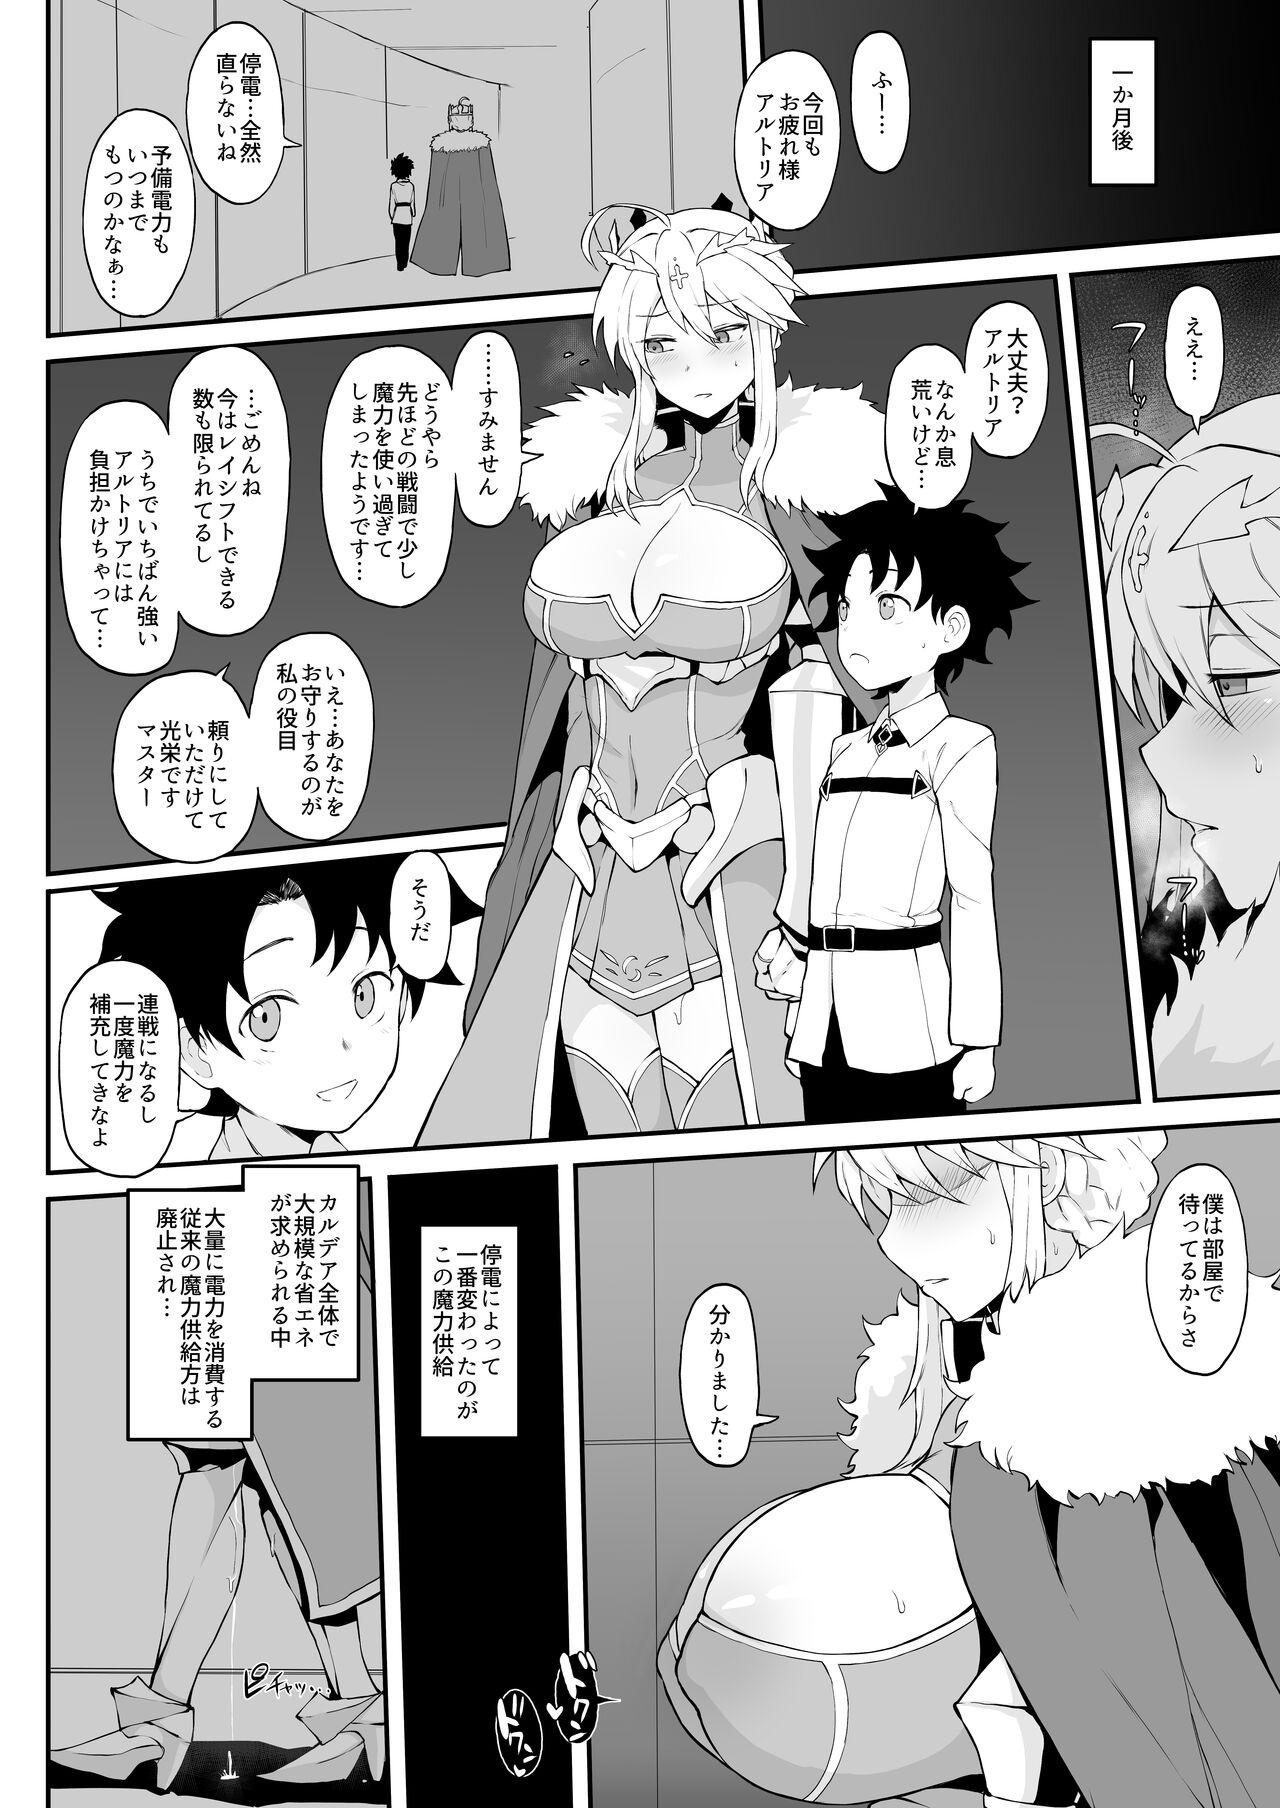 Hiddencam No Title - Fate grand order Trimmed - Page 4